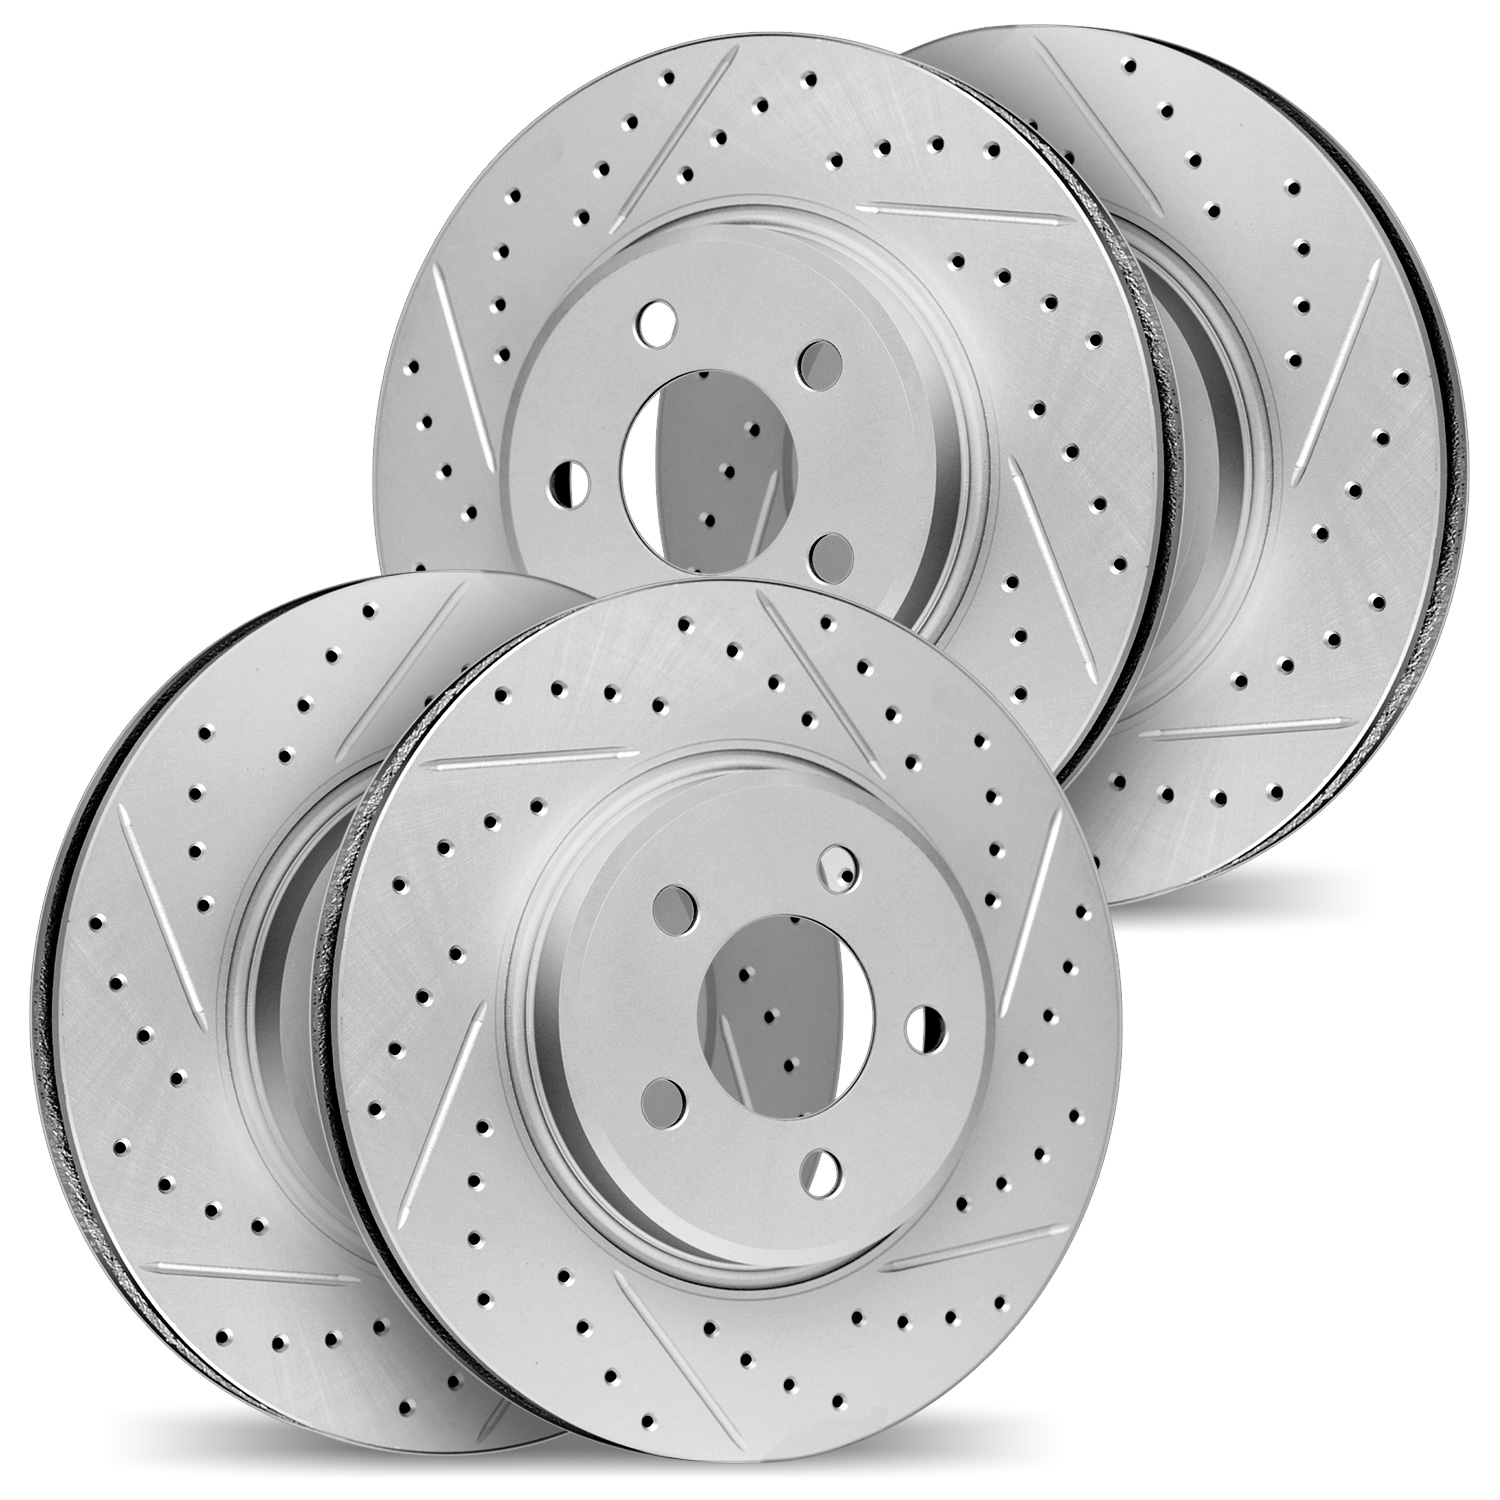 2004-58008 Geoperformance Drilled/Slotted Brake Rotors, 2005-2012 Acura/Honda, Position: Front and Rear